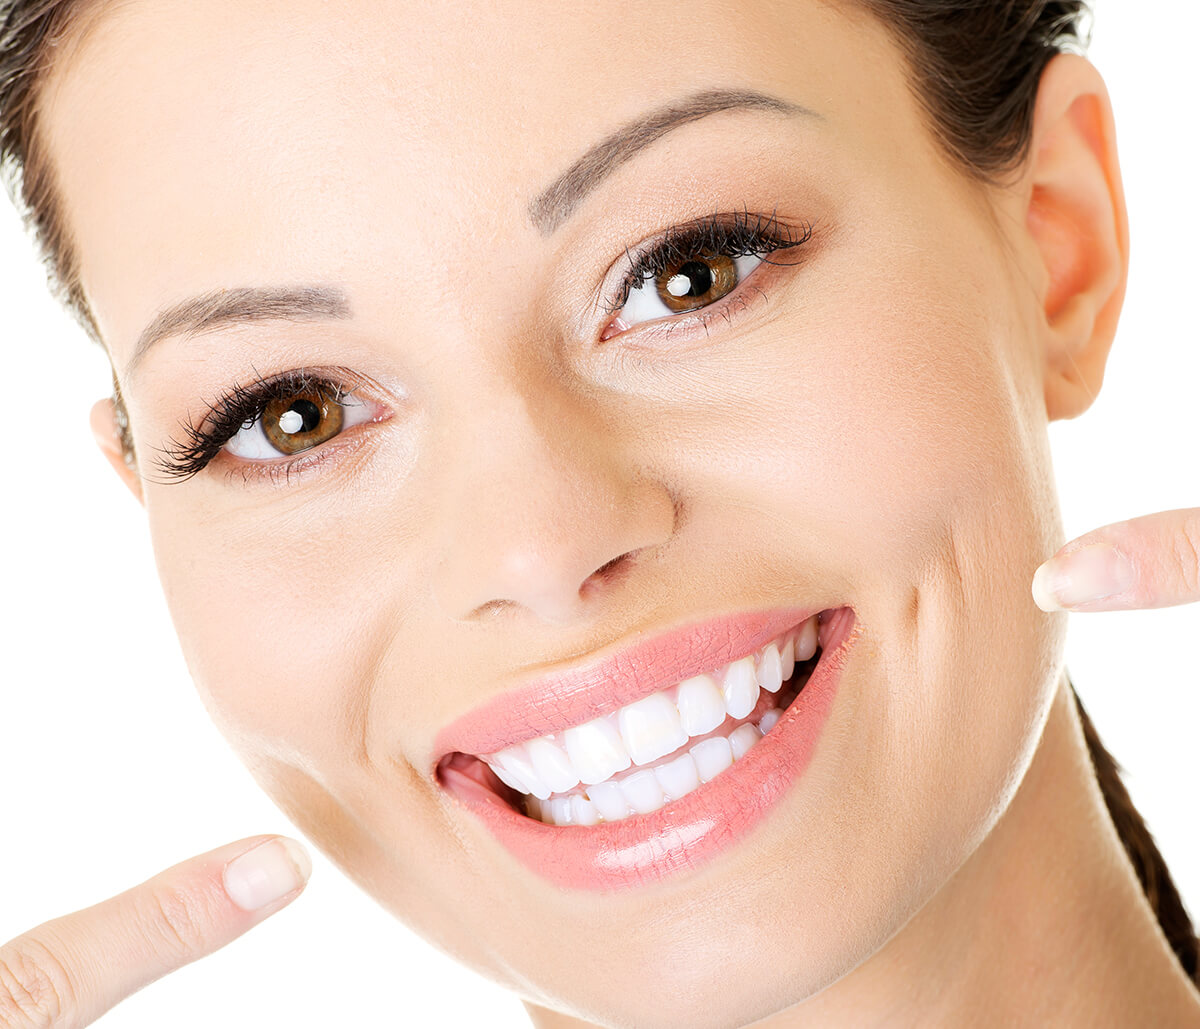 Rejuvenate Your Smile with Chao Pinhole® Surgical Technique for Receding Gums in Turlock, CA Area